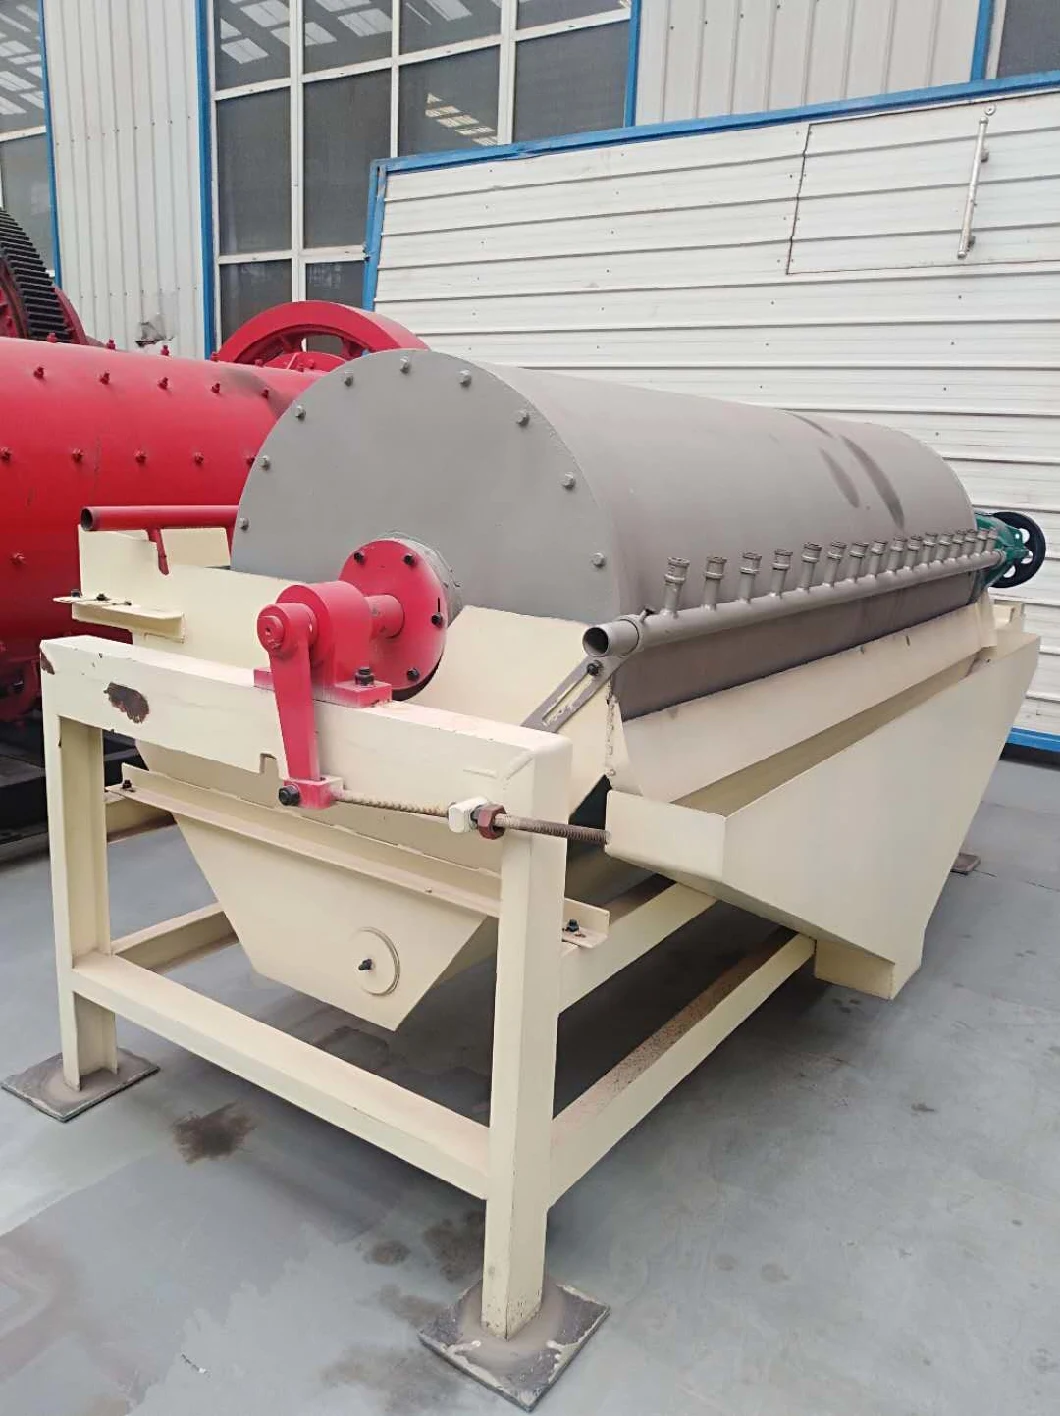 Mining Iron Remover Machine of Magnetic Drum Separator Machine for Iron Remove in Kaolin Processing Line